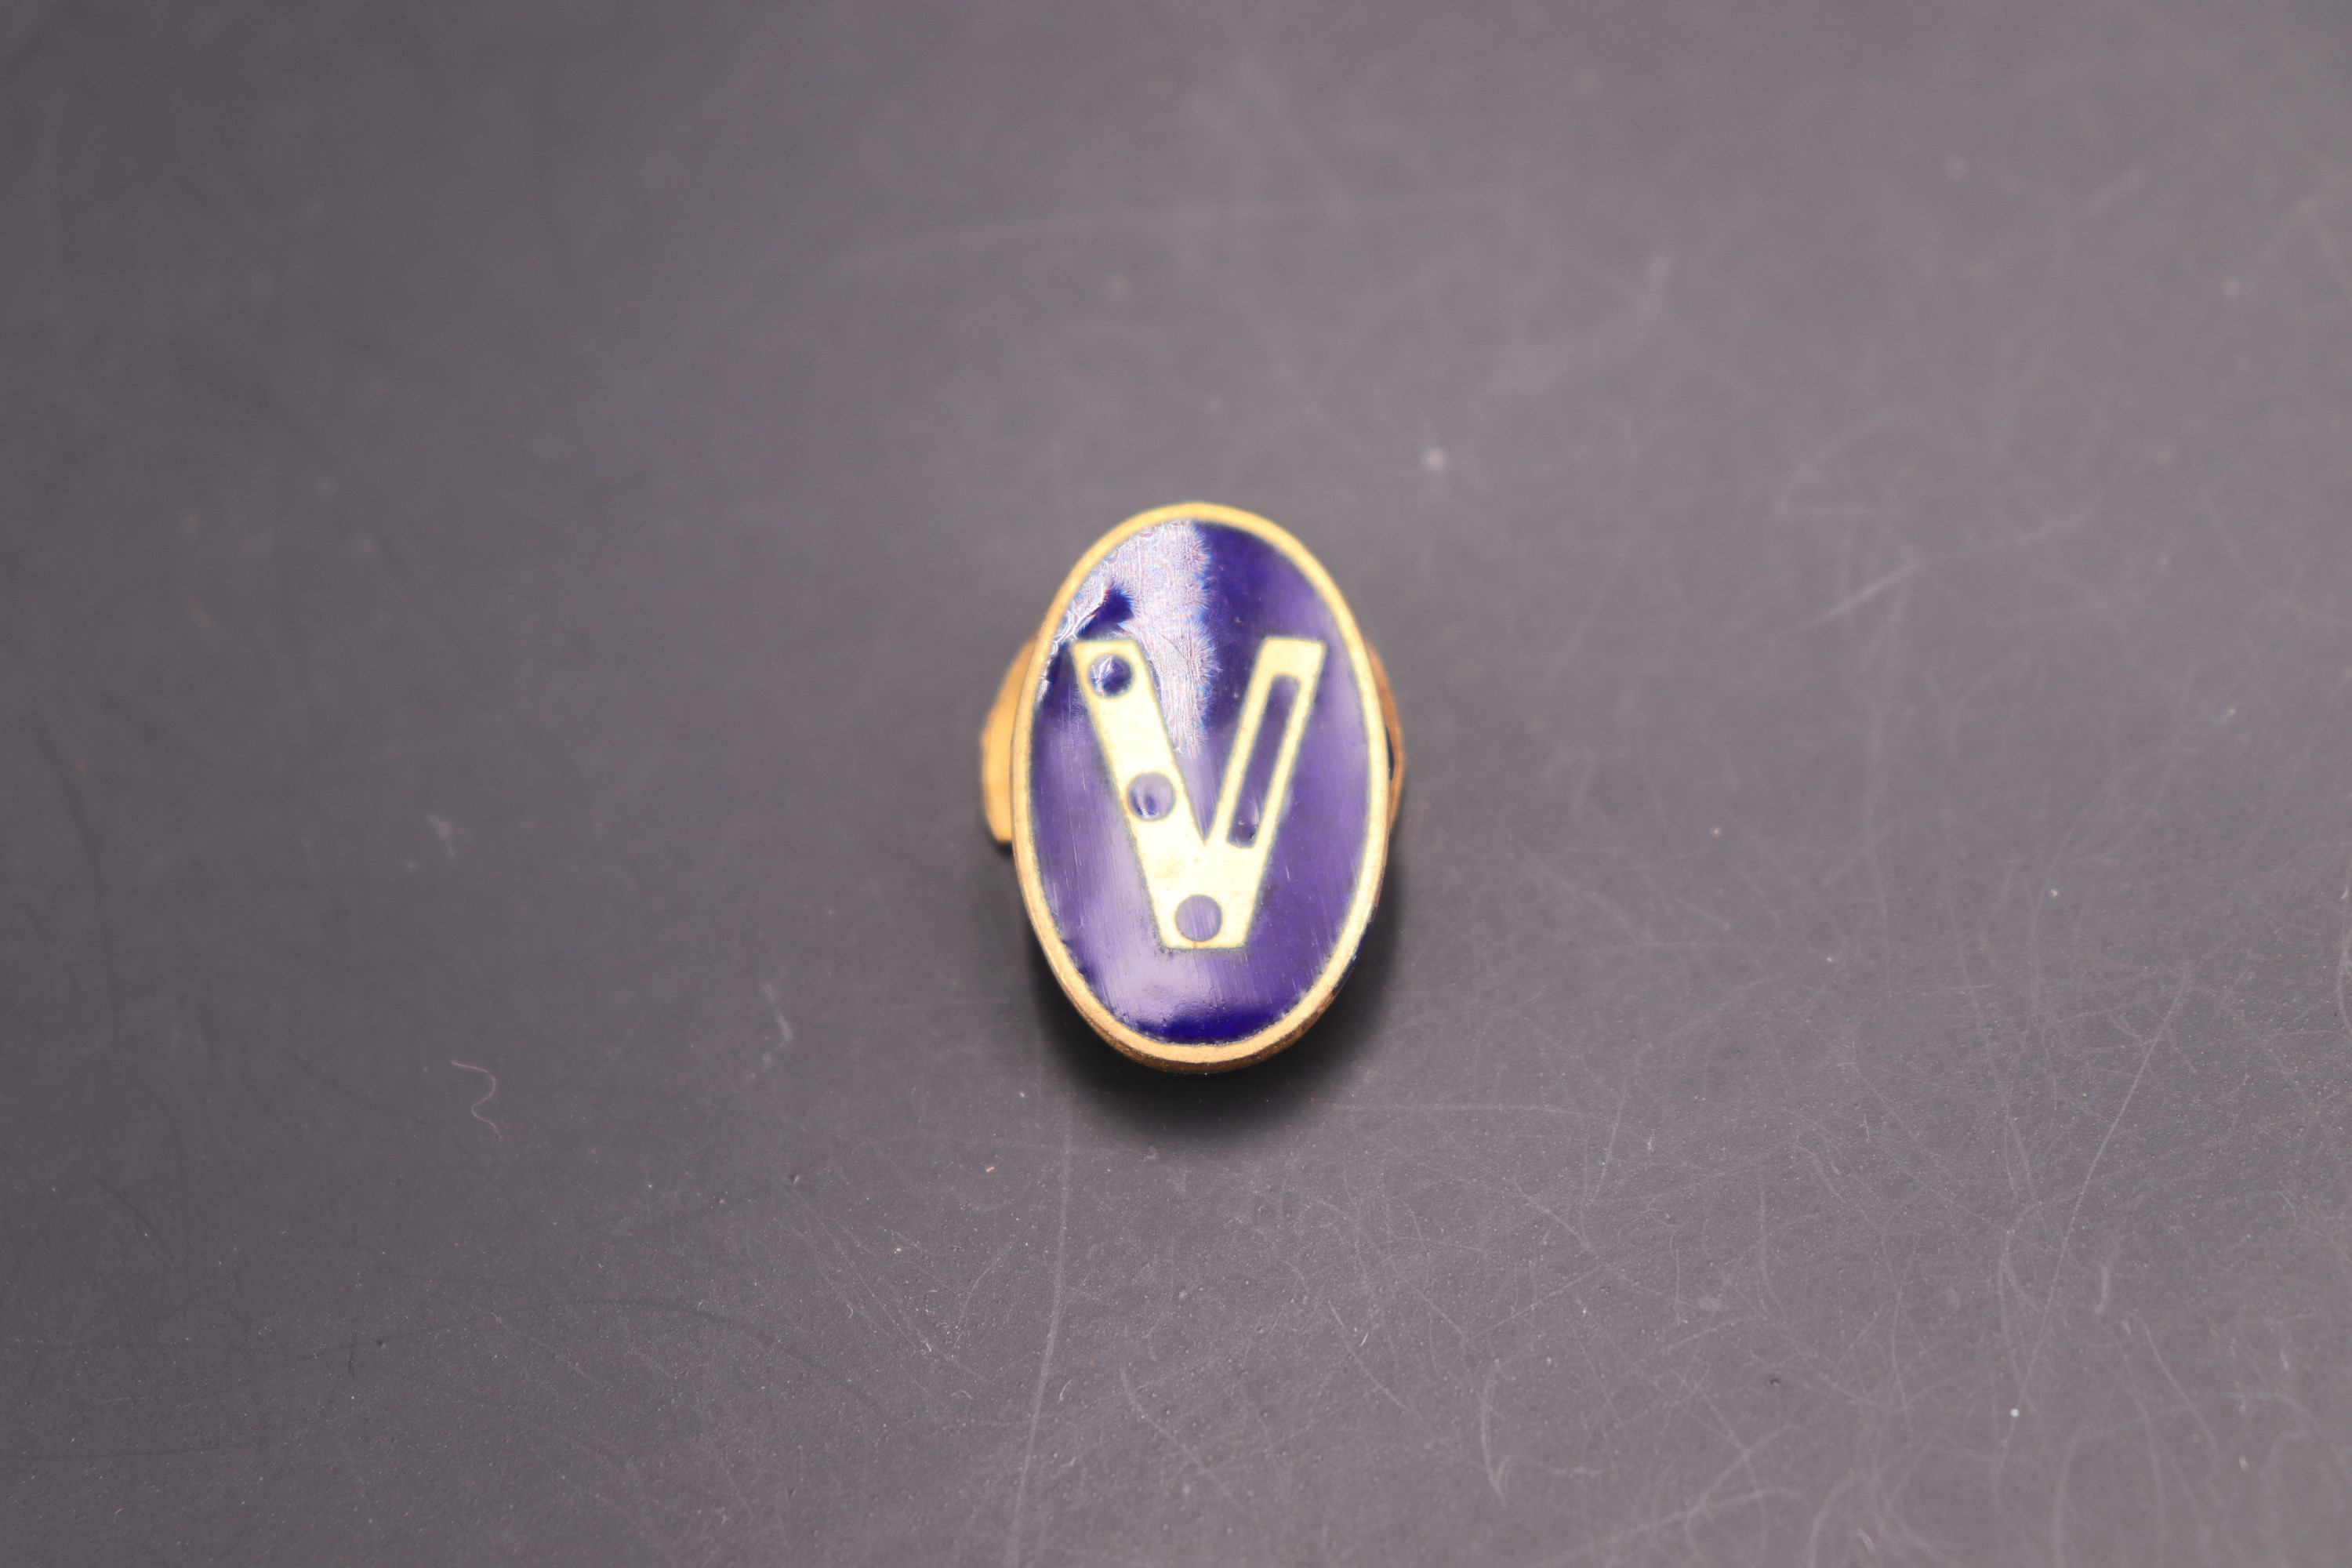 A Second World War "V for victory" lapel badge